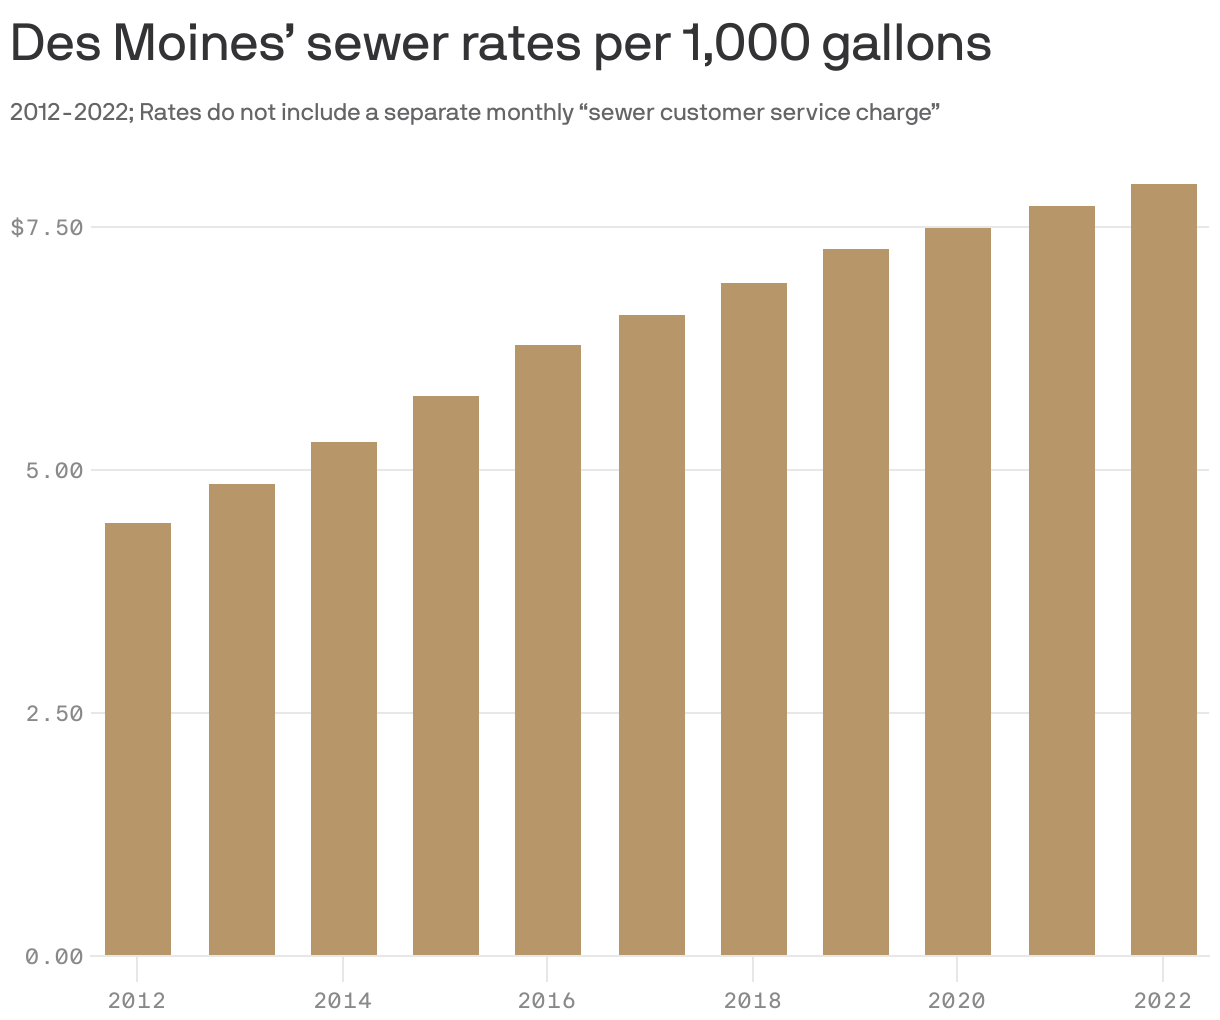 Des Moines’ sewer rates per 1,000 gallons